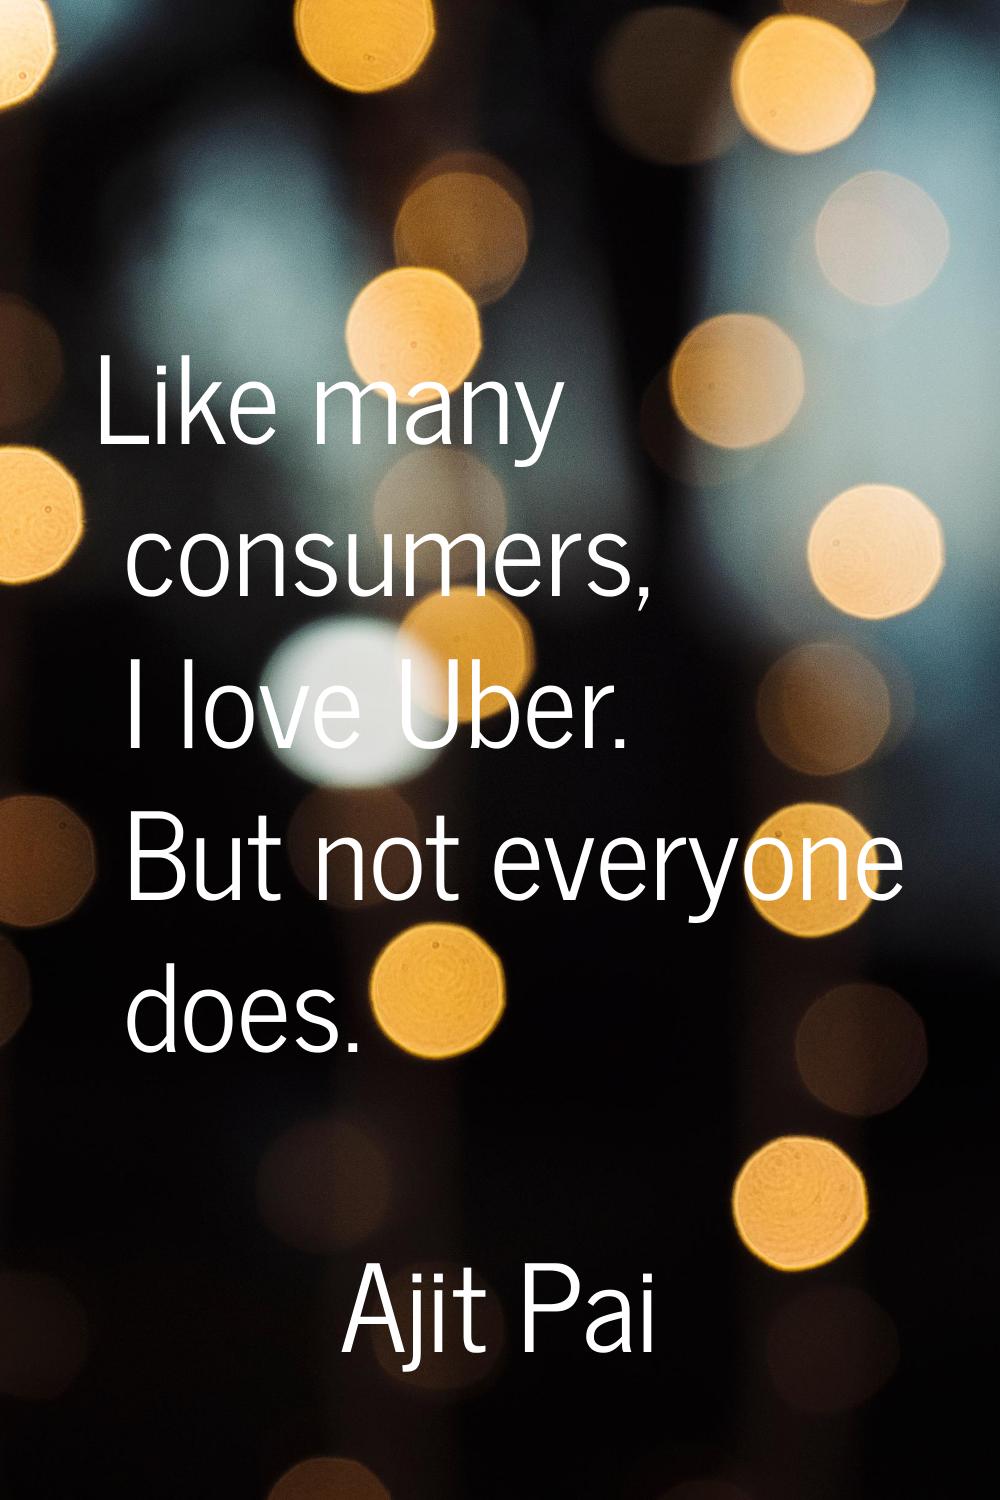 Like many consumers, I love Uber. But not everyone does.